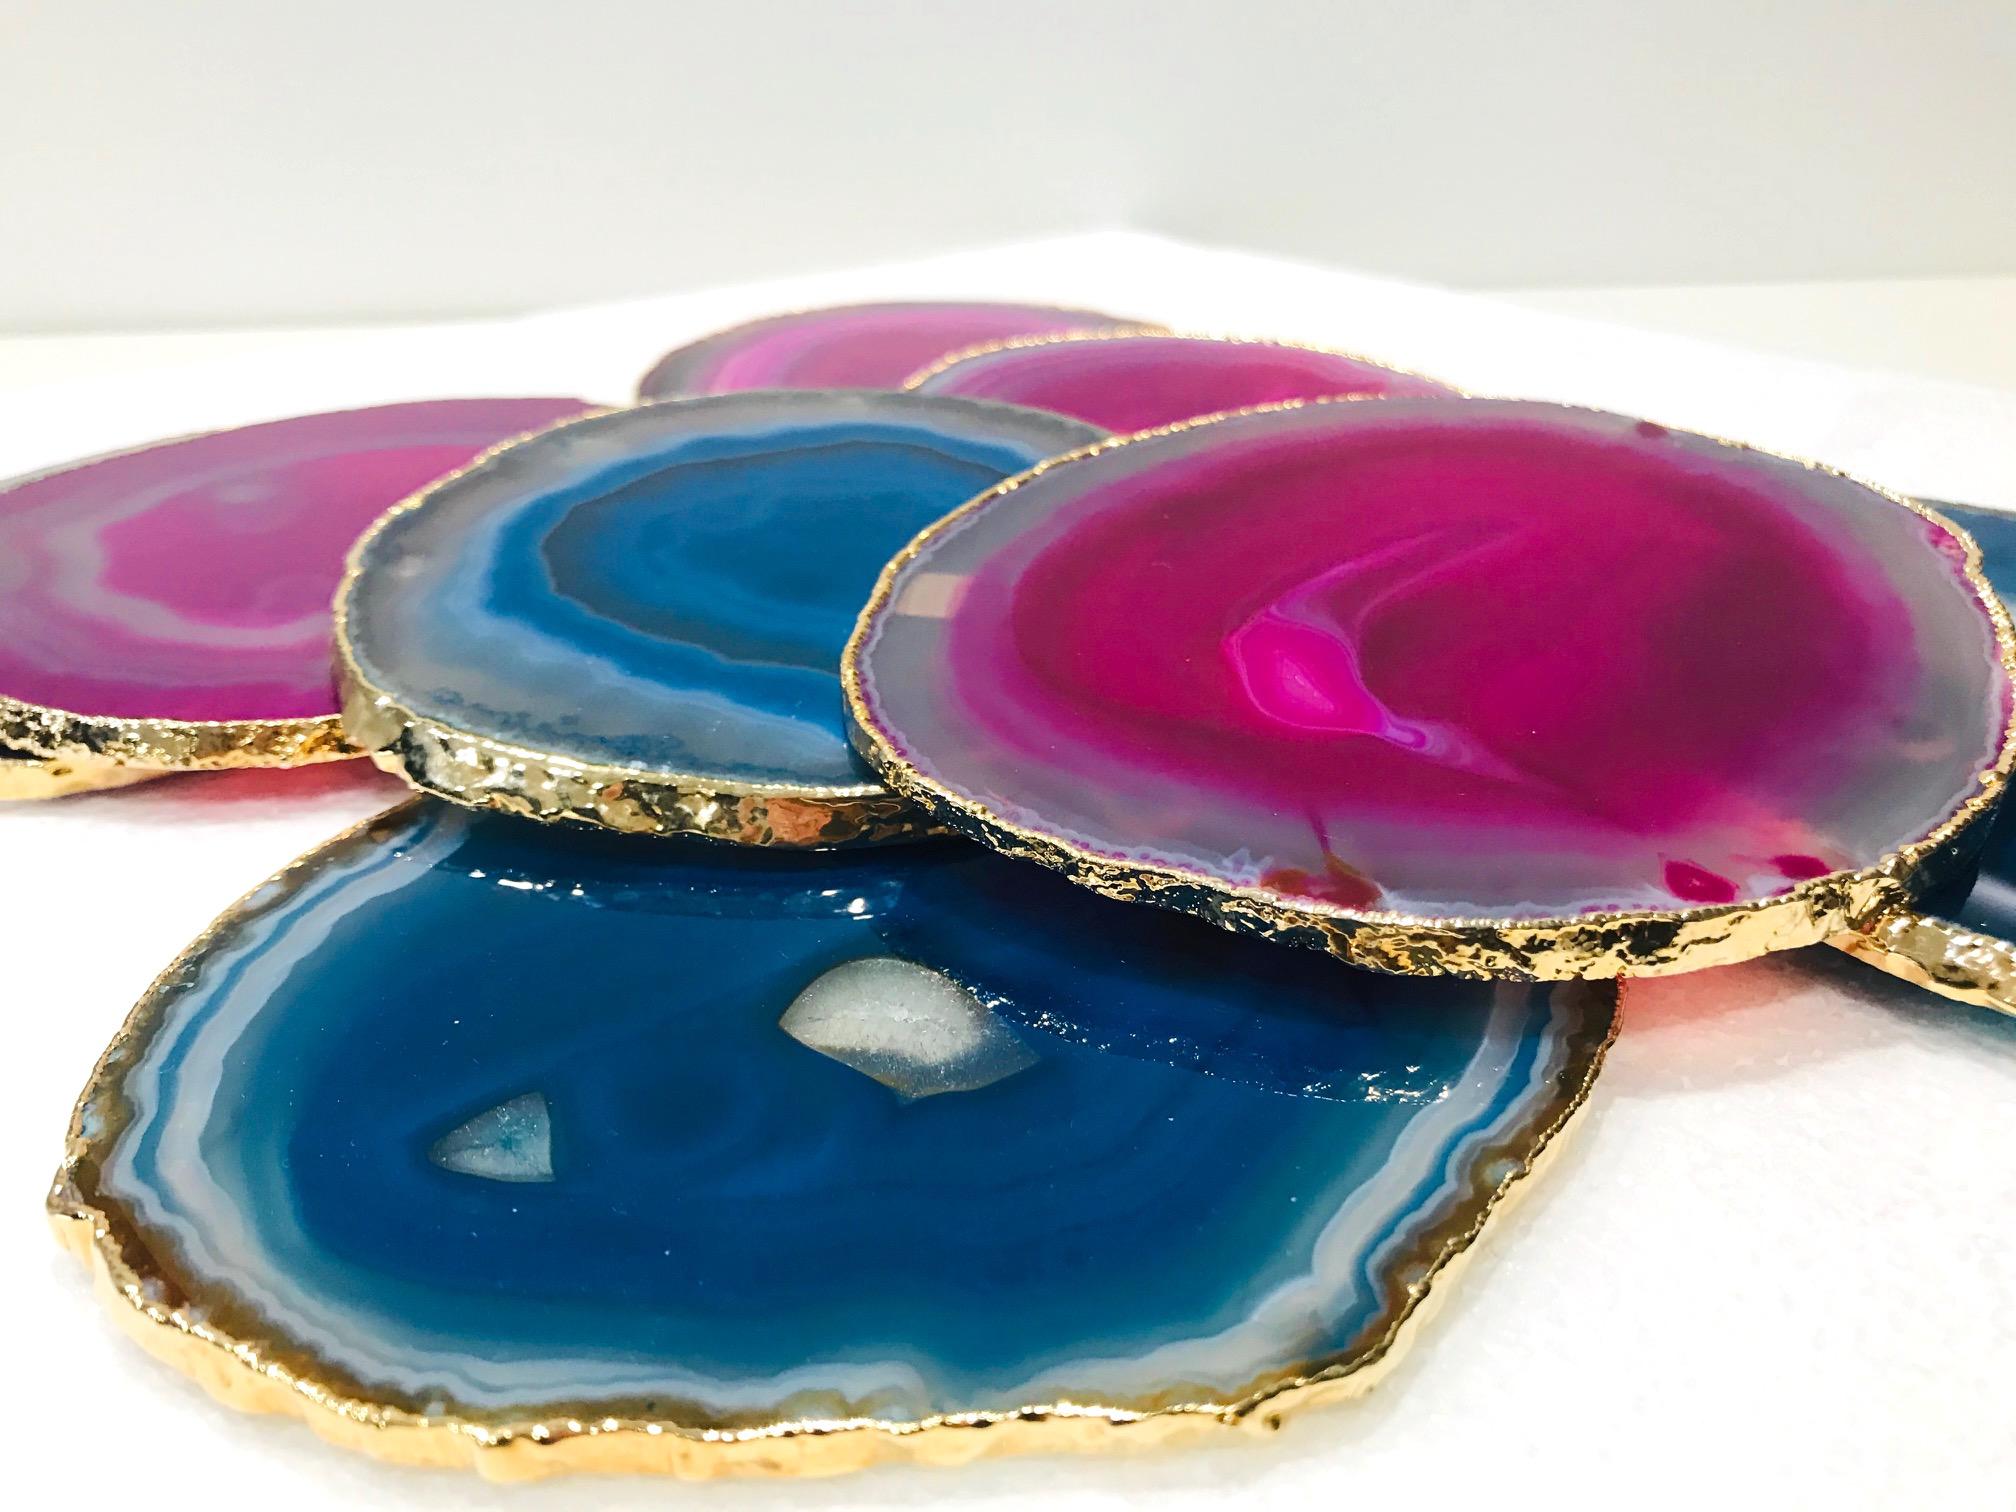 Hand-Crafted Semi-Precious Gemstone Coasters in Pink and Turquoise with 24k Gold Trim, Set /8 For Sale